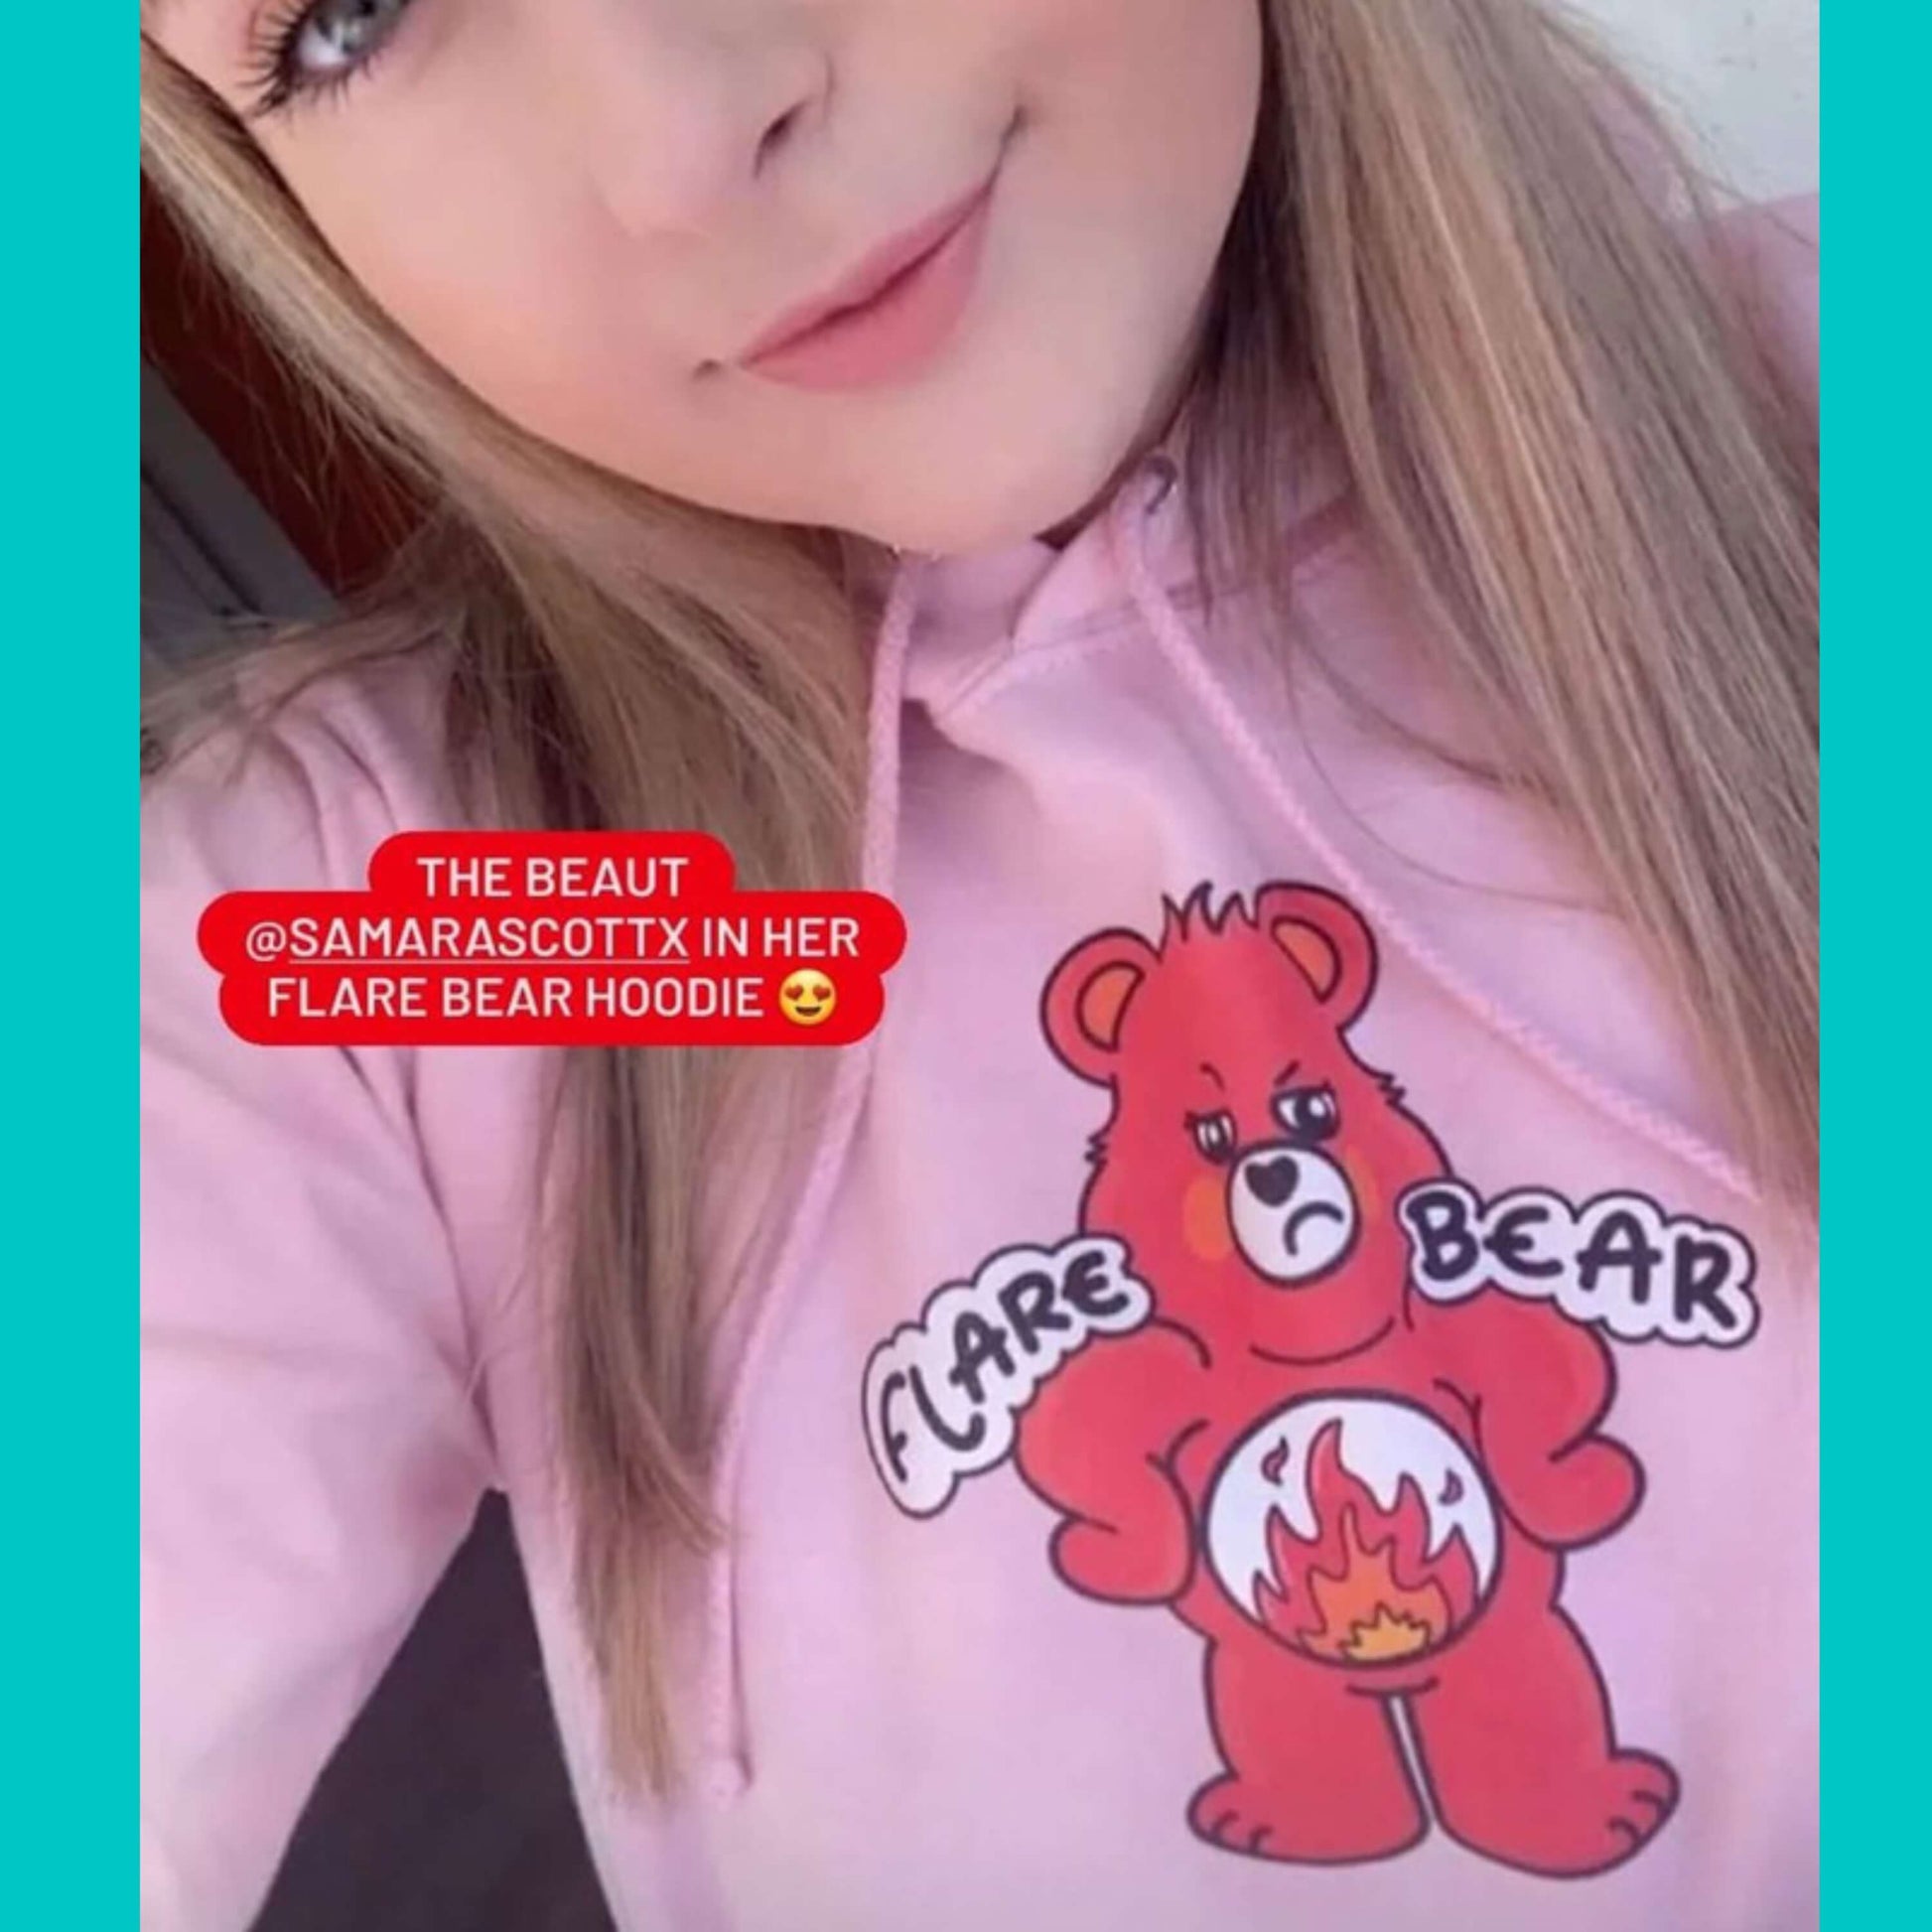 Flare Bear hoodie jumper in baby pink modelled by a blonde femme smiling innabox customer. The hoodie is of a red bear with a fed up expression and hands on its hips. There is a white circle on its belly with flames inside. Flare Bear is written on the hoodie. The hoodie is designed to raise awareness for chronic illness flare ups.